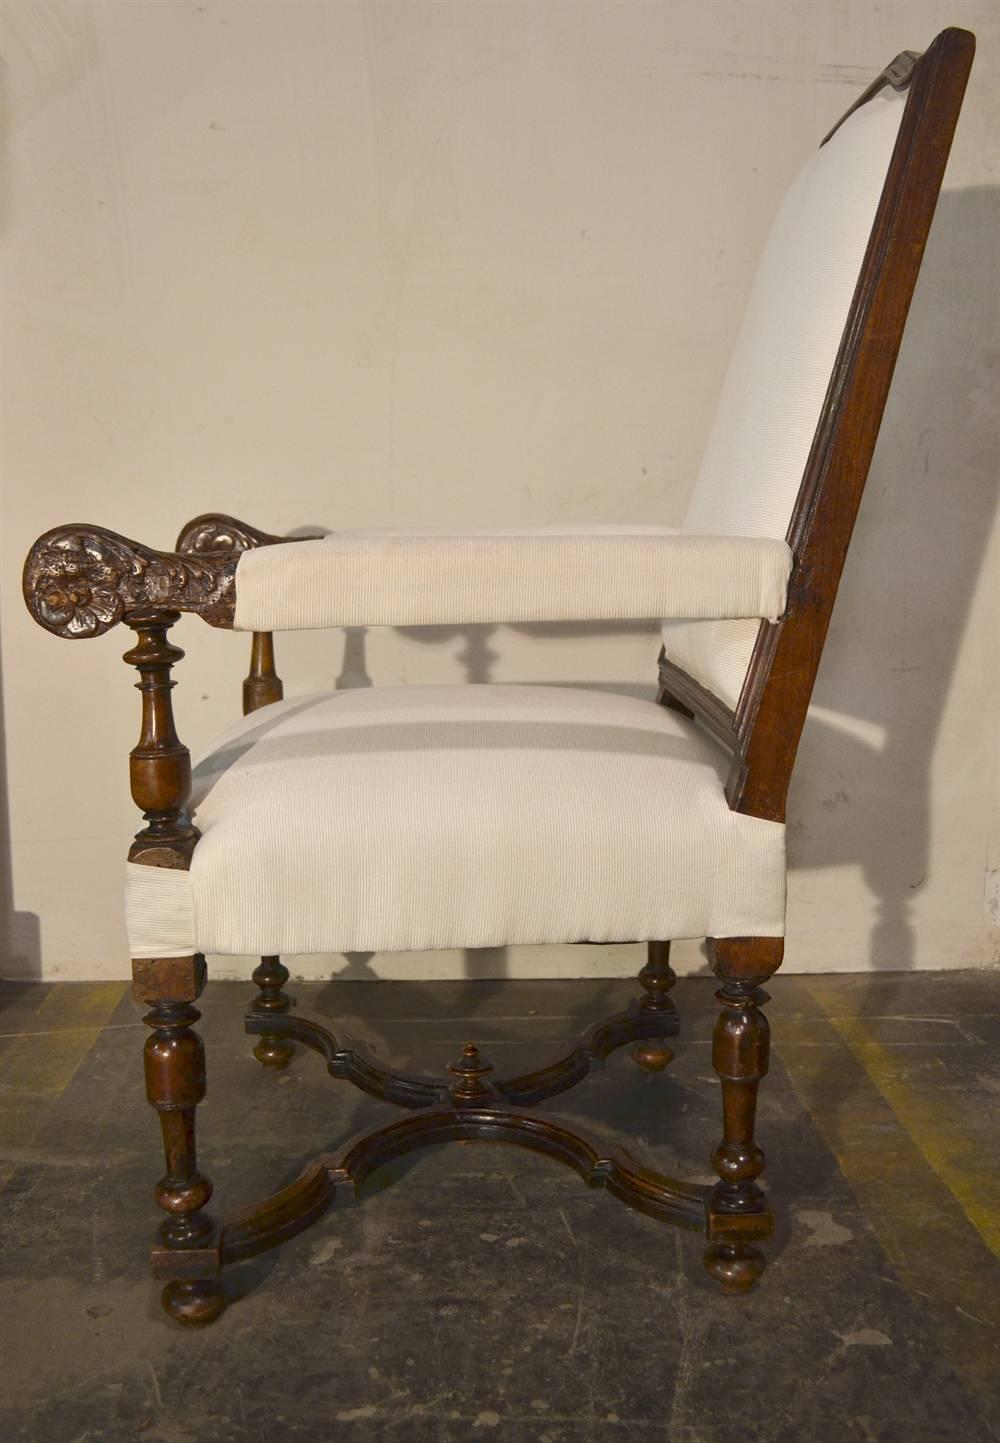 This stylish chair has been a favourite piece, but it's time for it to find a new home. It's nicely carved and an early piece, dating from the late 18th century. The back has a comfortable pitch and the piece is in good condition. There is a minor